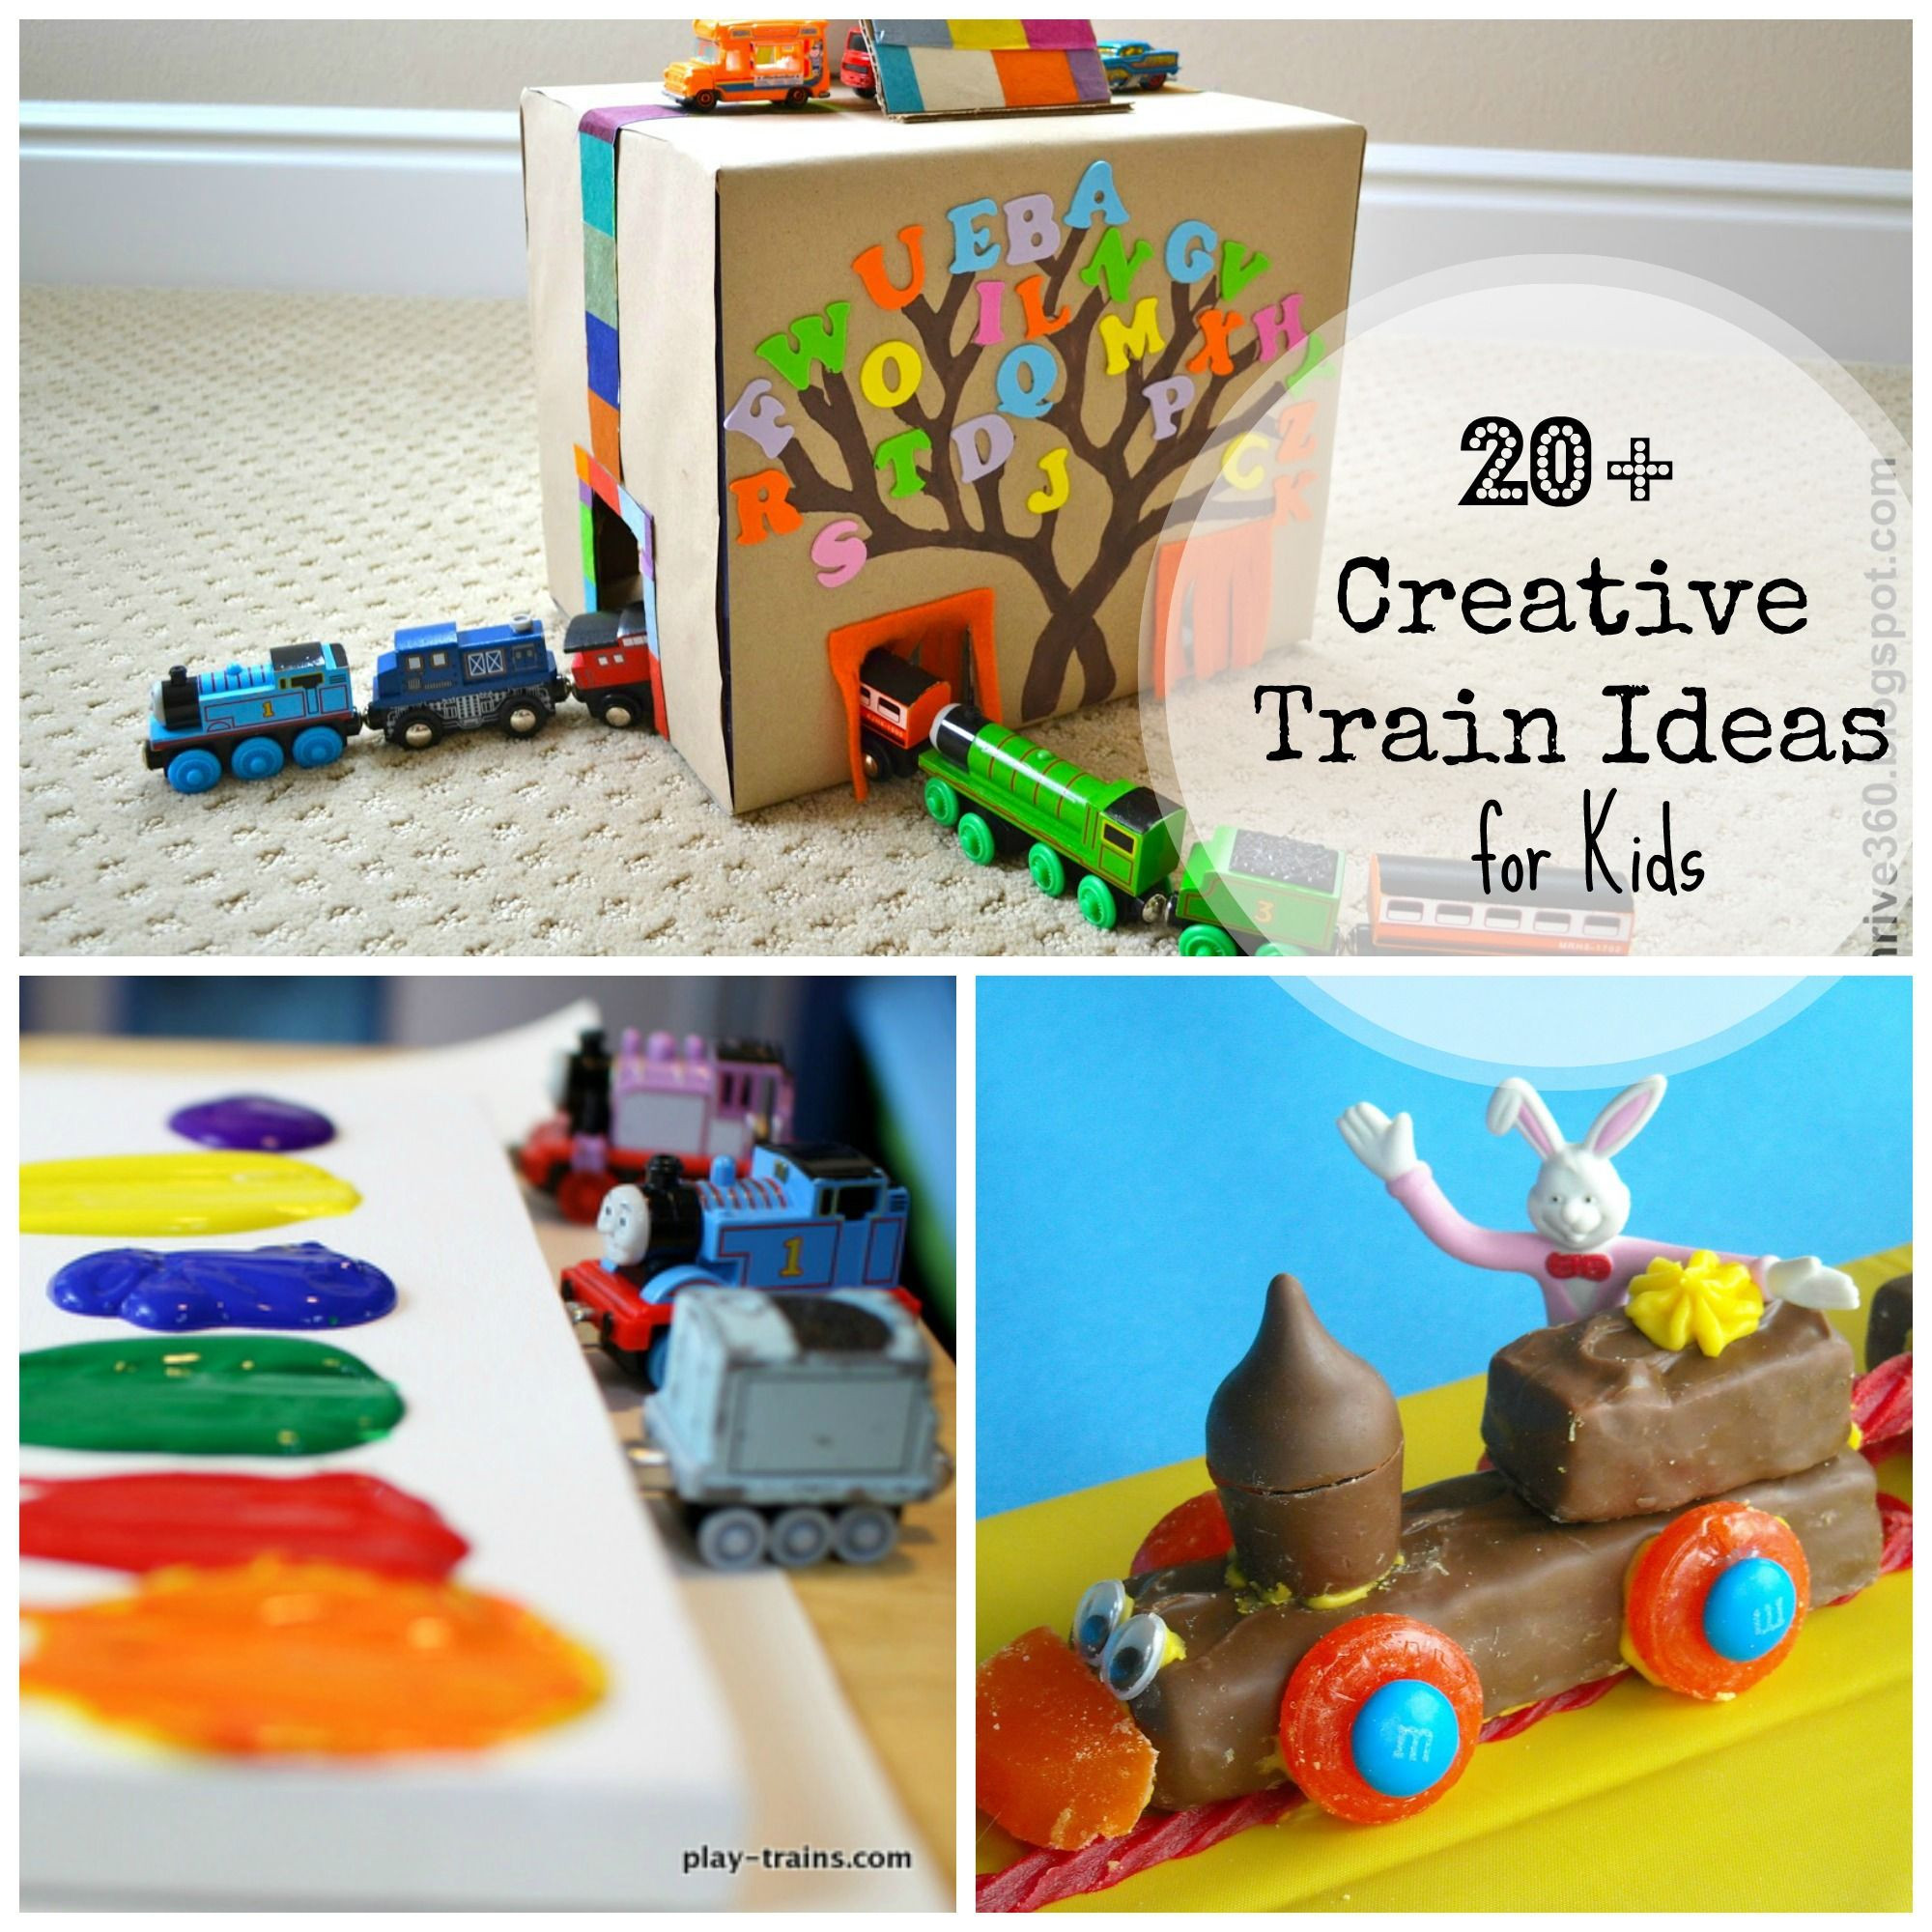 Train Craft For Kids
 All Aboard 20 Creative Train Ideas for Kids